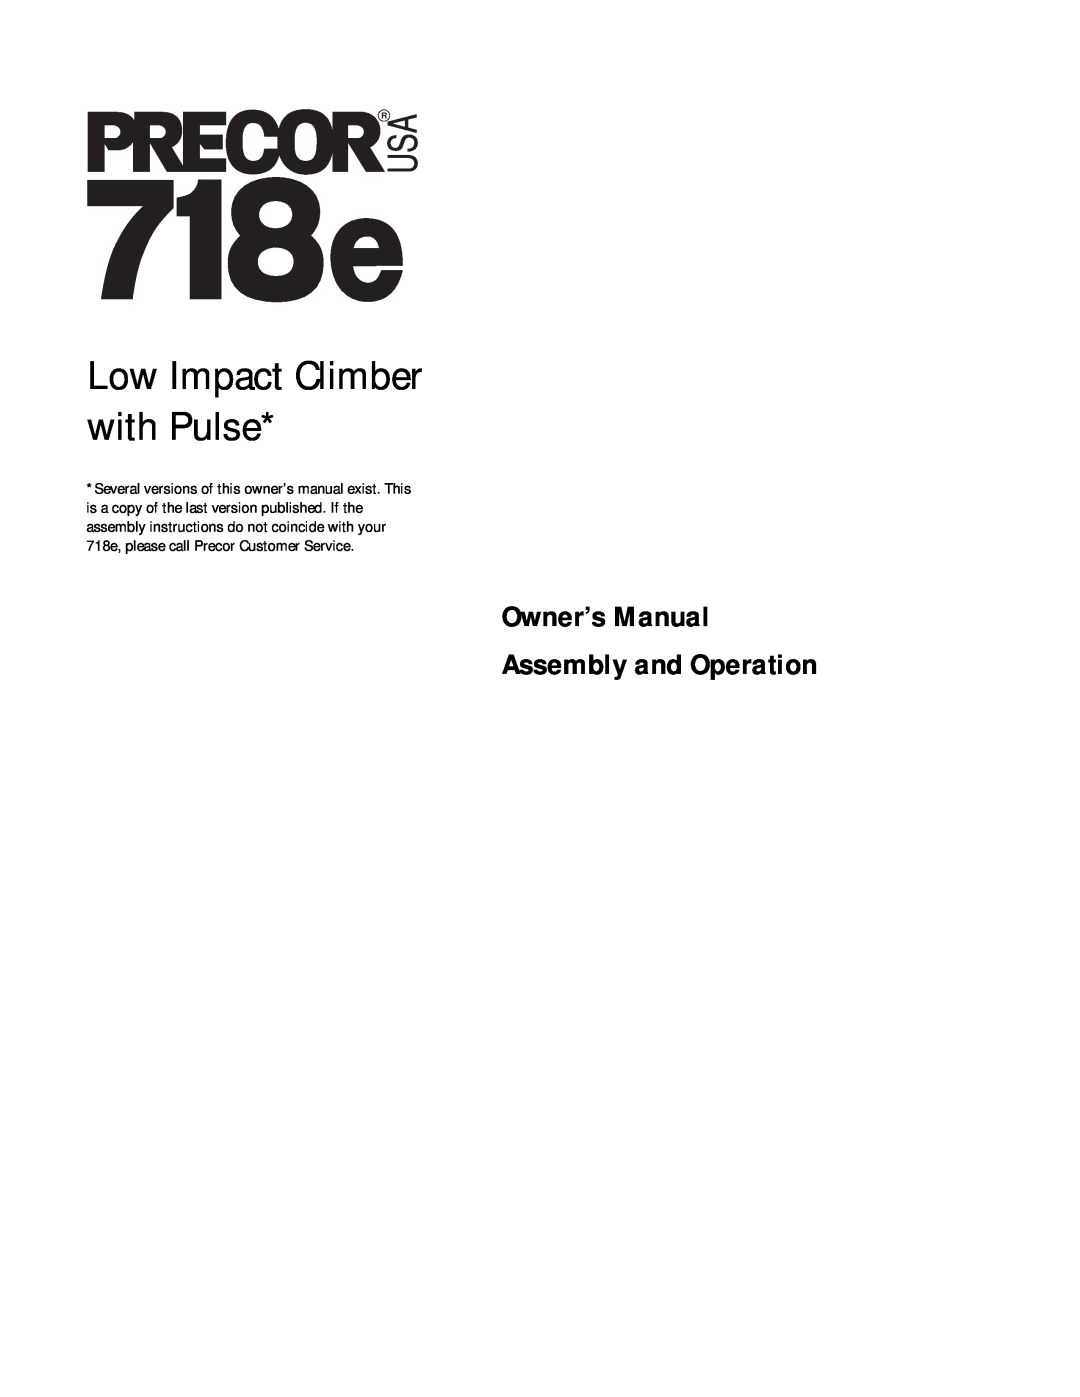 Precor 718e owner manual Low Impact Climber with Pulse, Owner’s Manual Assembly and Operation 